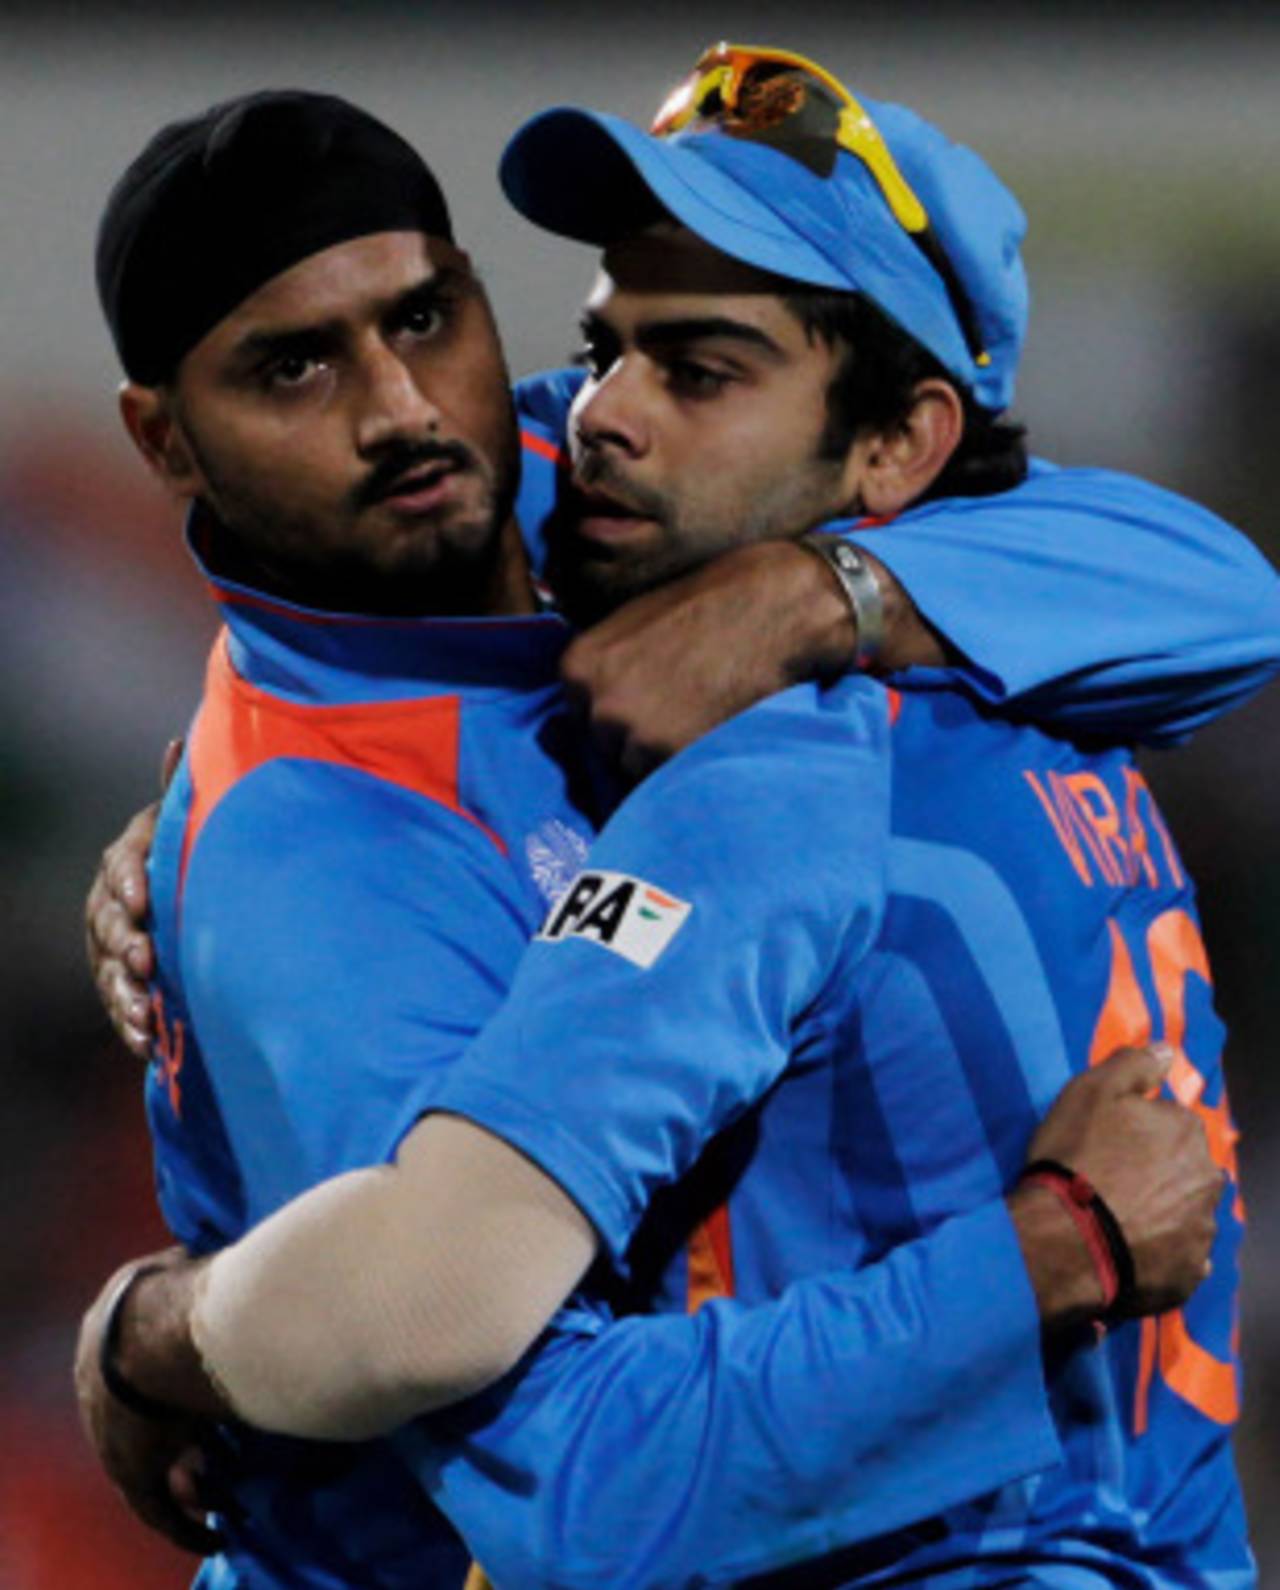 Harbhajan Singh and Virat Kohli embrace after combining to dismiss AB de Villiers, India v South Africa, Group B, World Cup, Nagpur, March 12, 2011